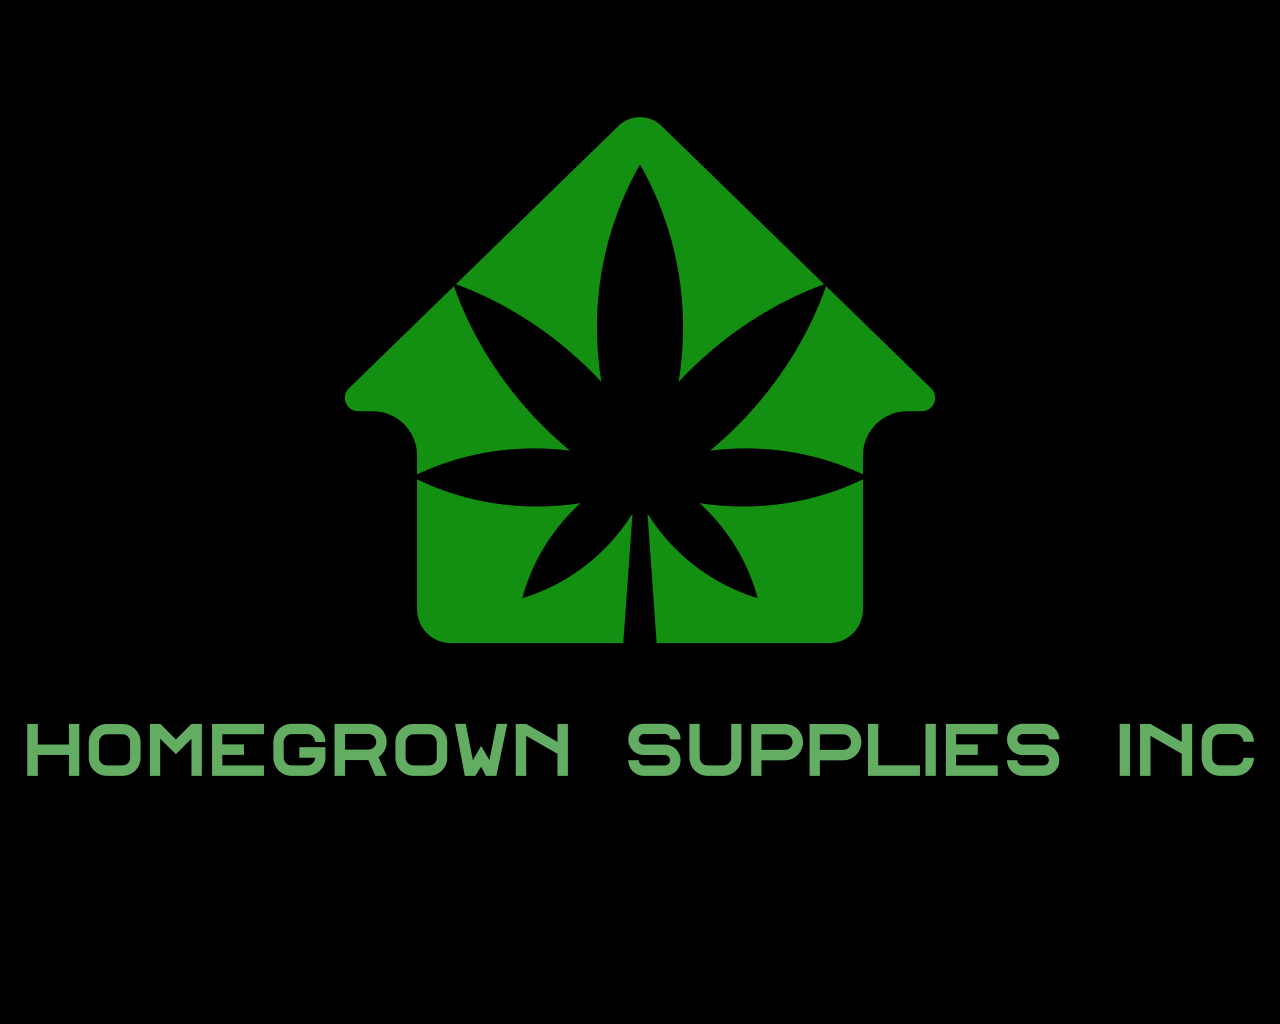 Home Grown Supplies St. Charles illinois